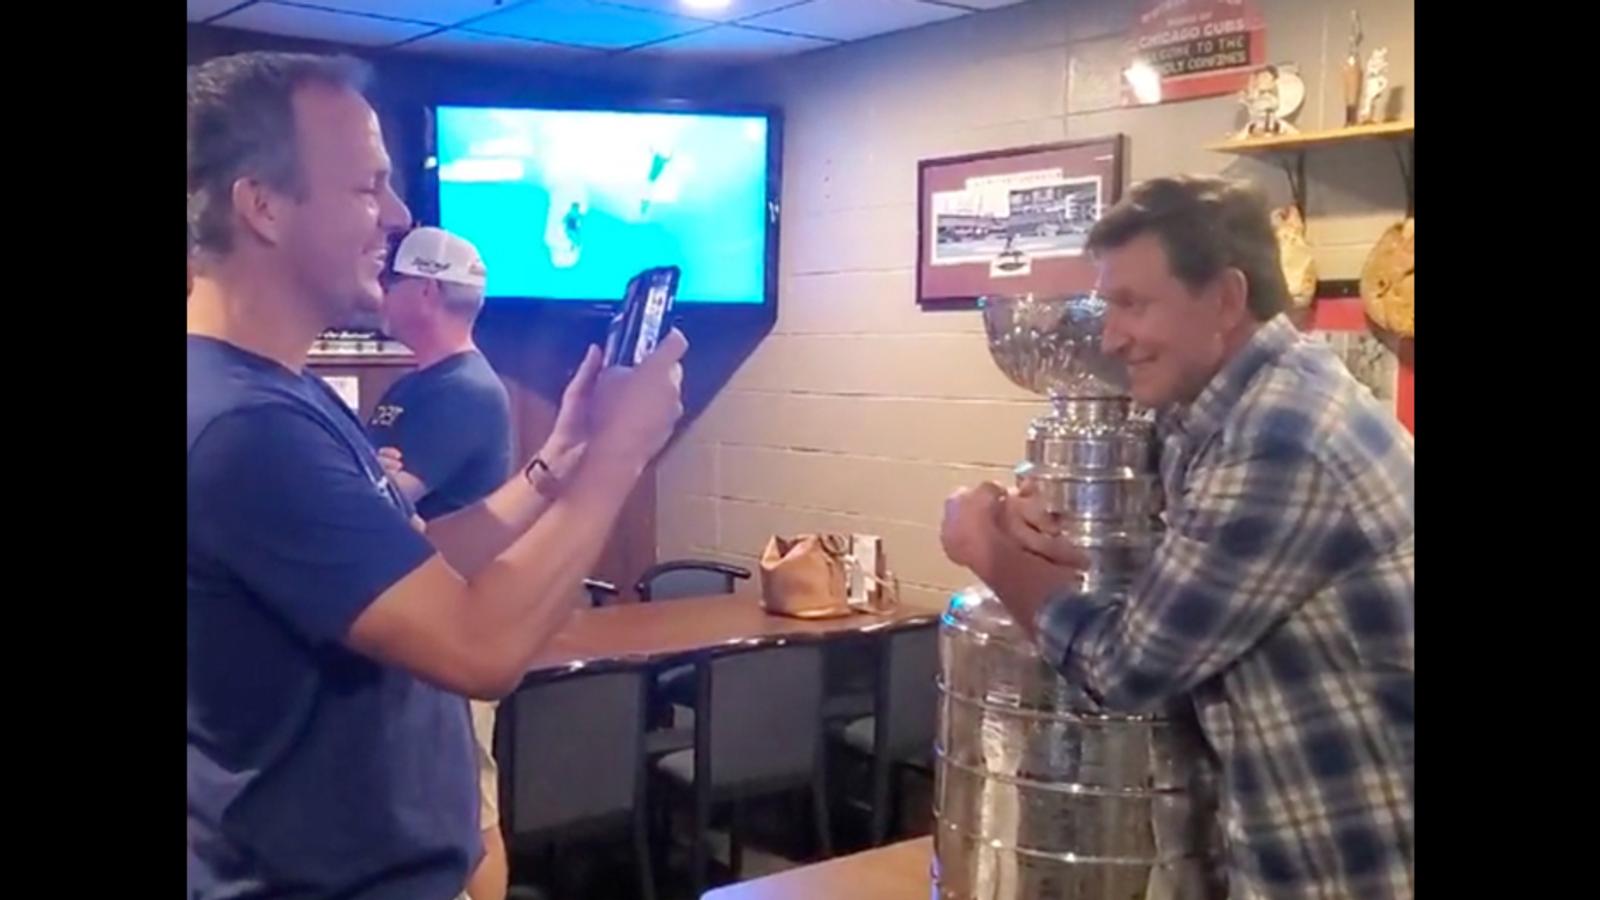 Gretzky is reunited with the Stanley Cup at Lightning's party